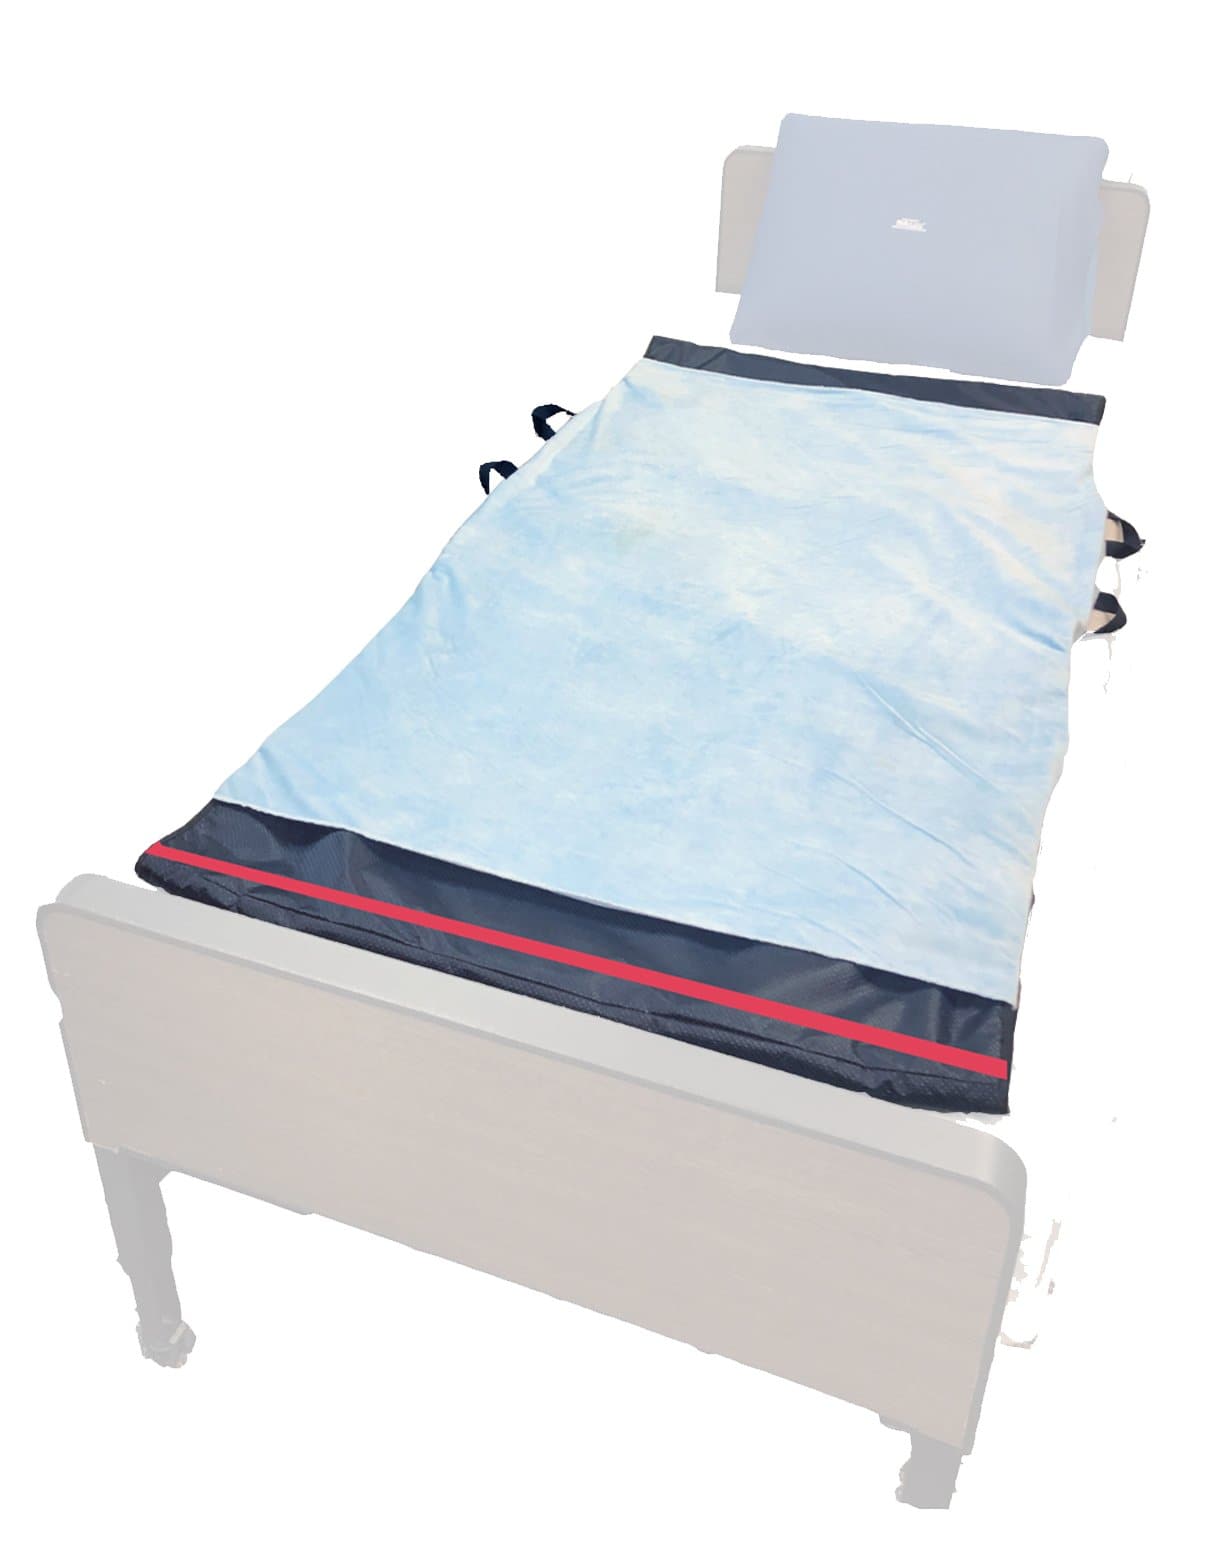 Skil-Care Bed Glide System - Turning and Patients Positioning Pads - Senior.com Patient Positioning